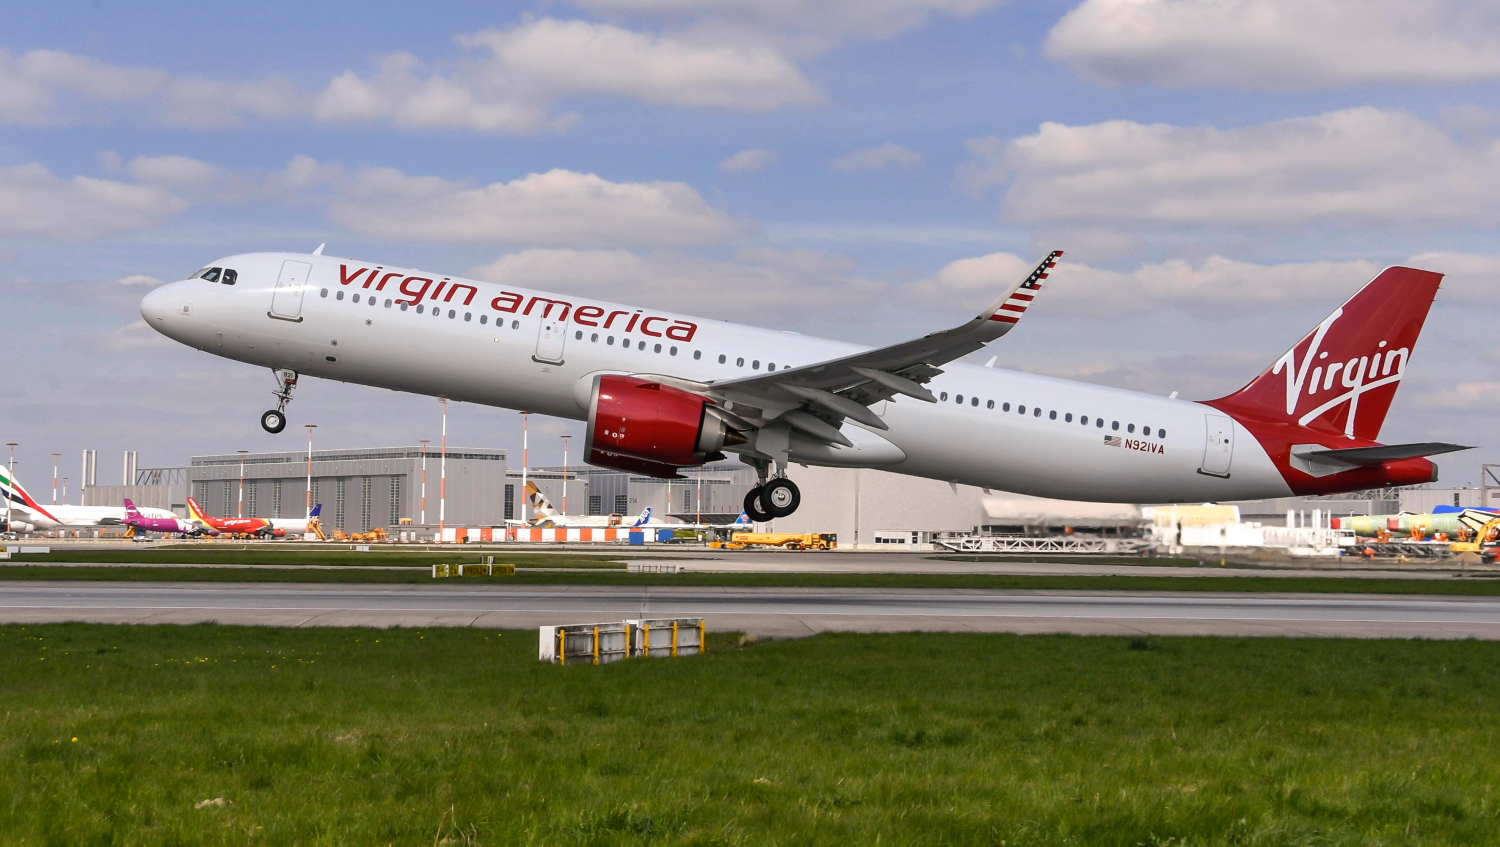 The first-ever A321neo, powered by CFM International’s LEAP-1A engines, has been delivered by Airbus to Virgin America